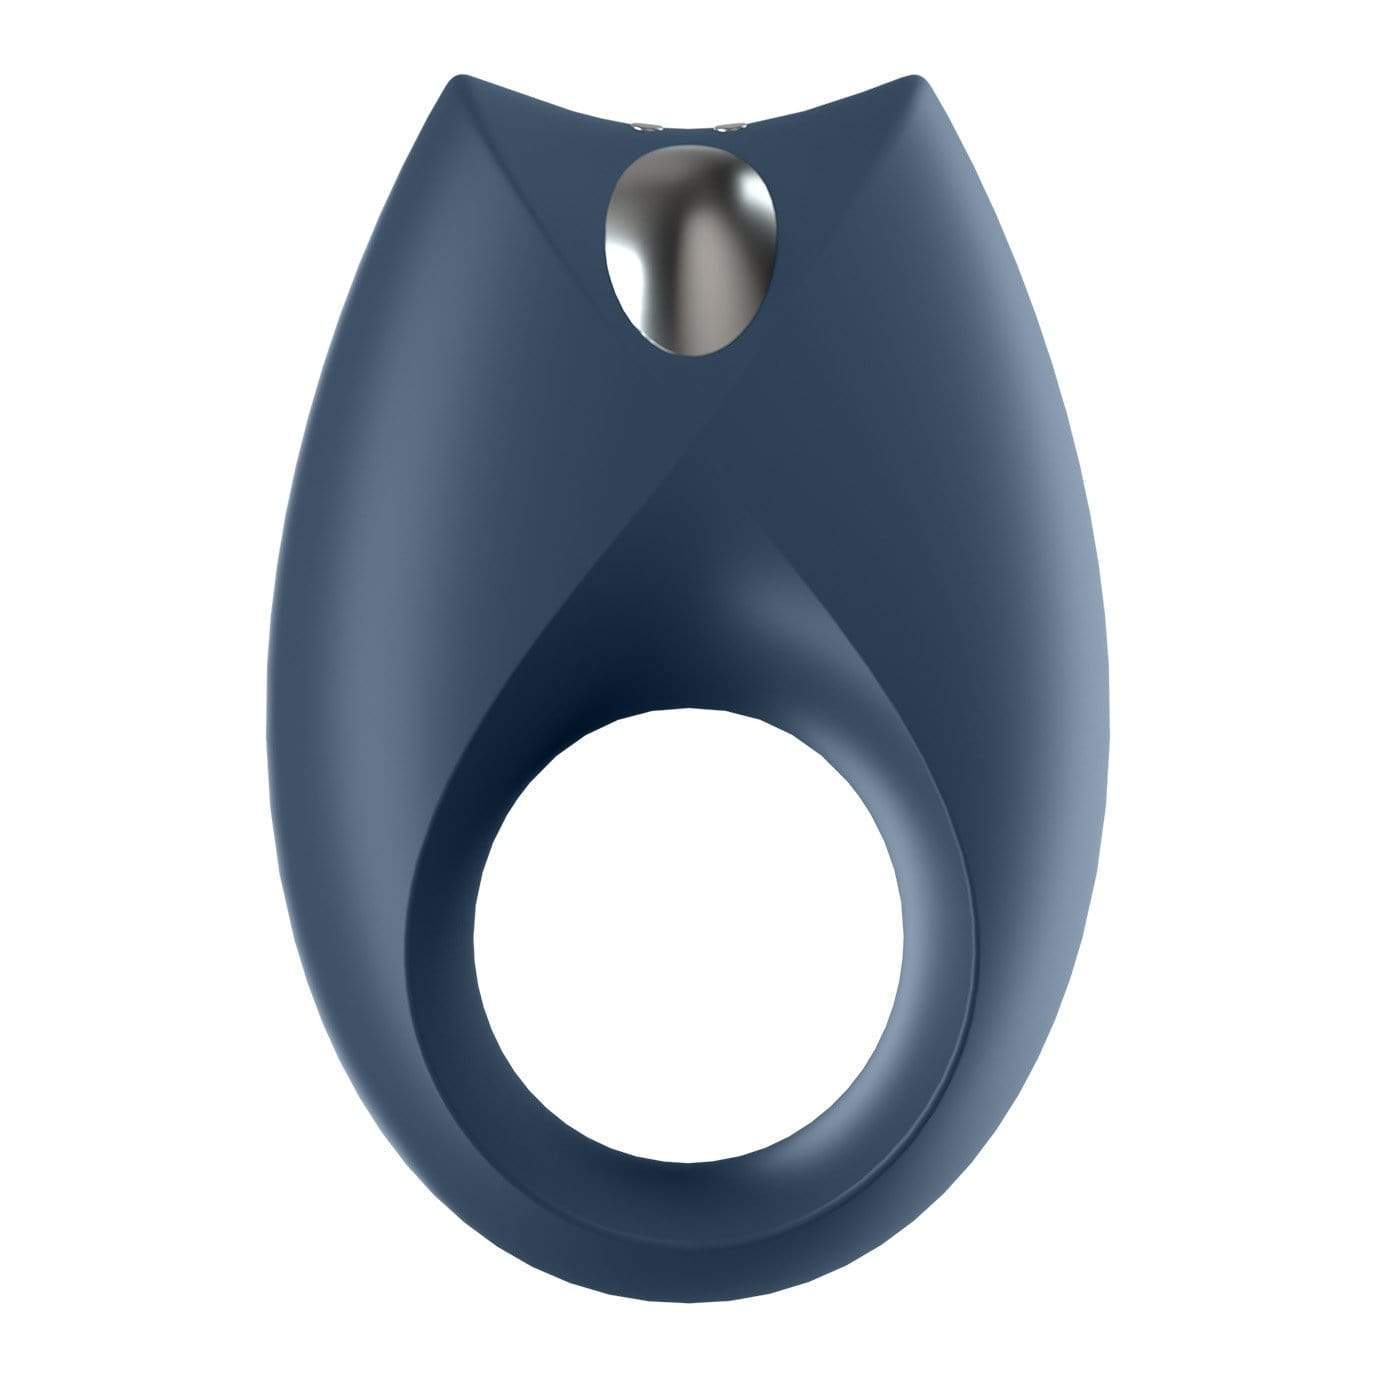 Satisfyer - Royal One Ring App-Controlled Bluetooth Cock Ring (Blue) Remote Control Cock Ring (Vibration) Rechargeable 289885076 CherryAffairs